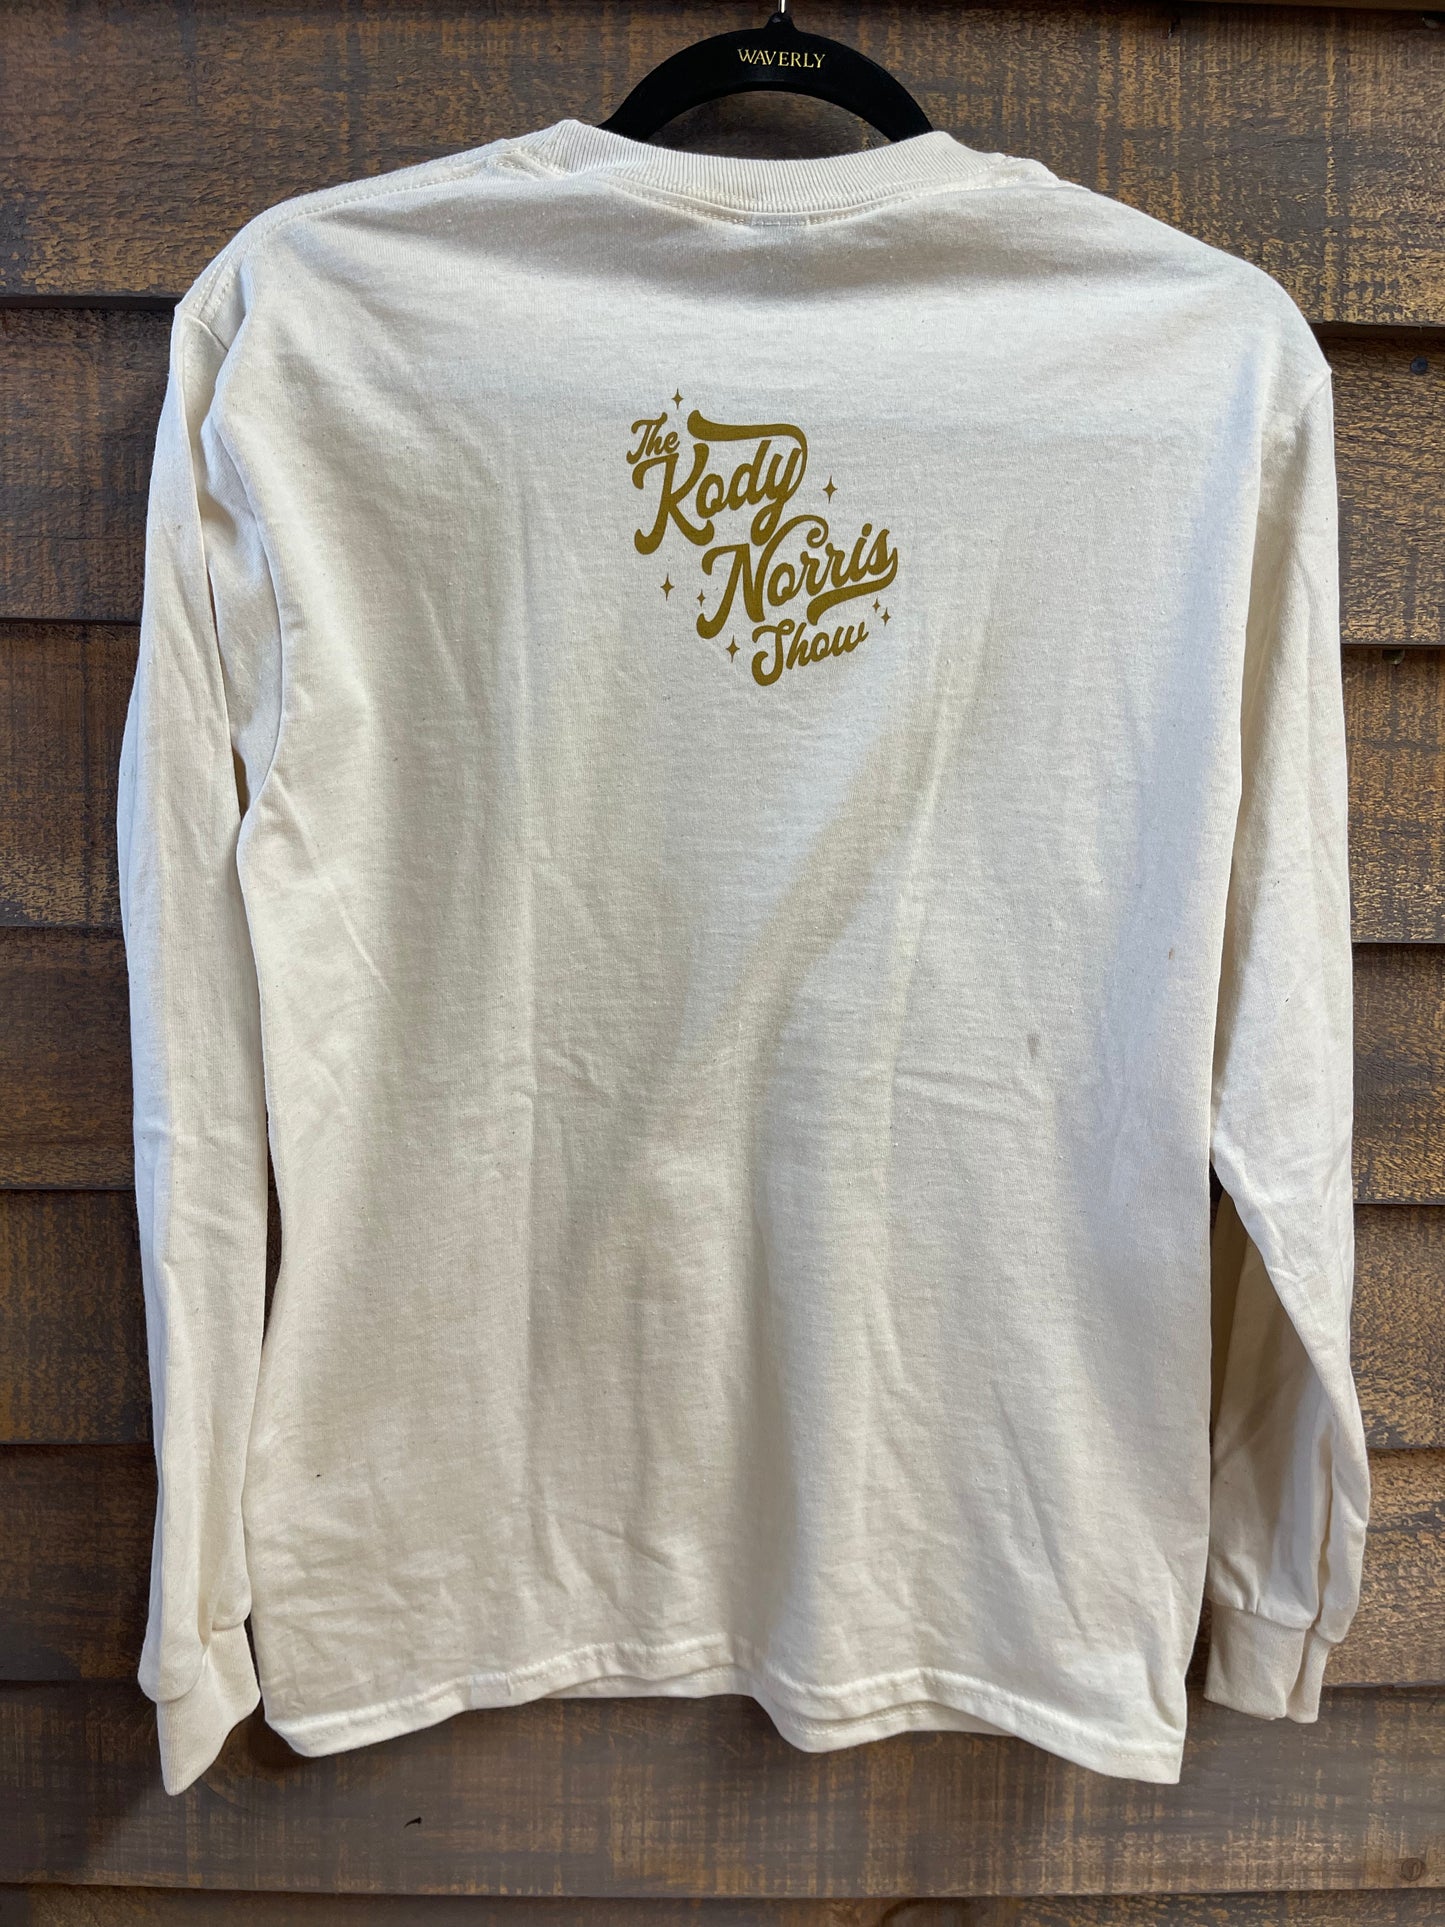 The Kody Norris Show Graphic Tee (Long Sleeve, Color Natural)